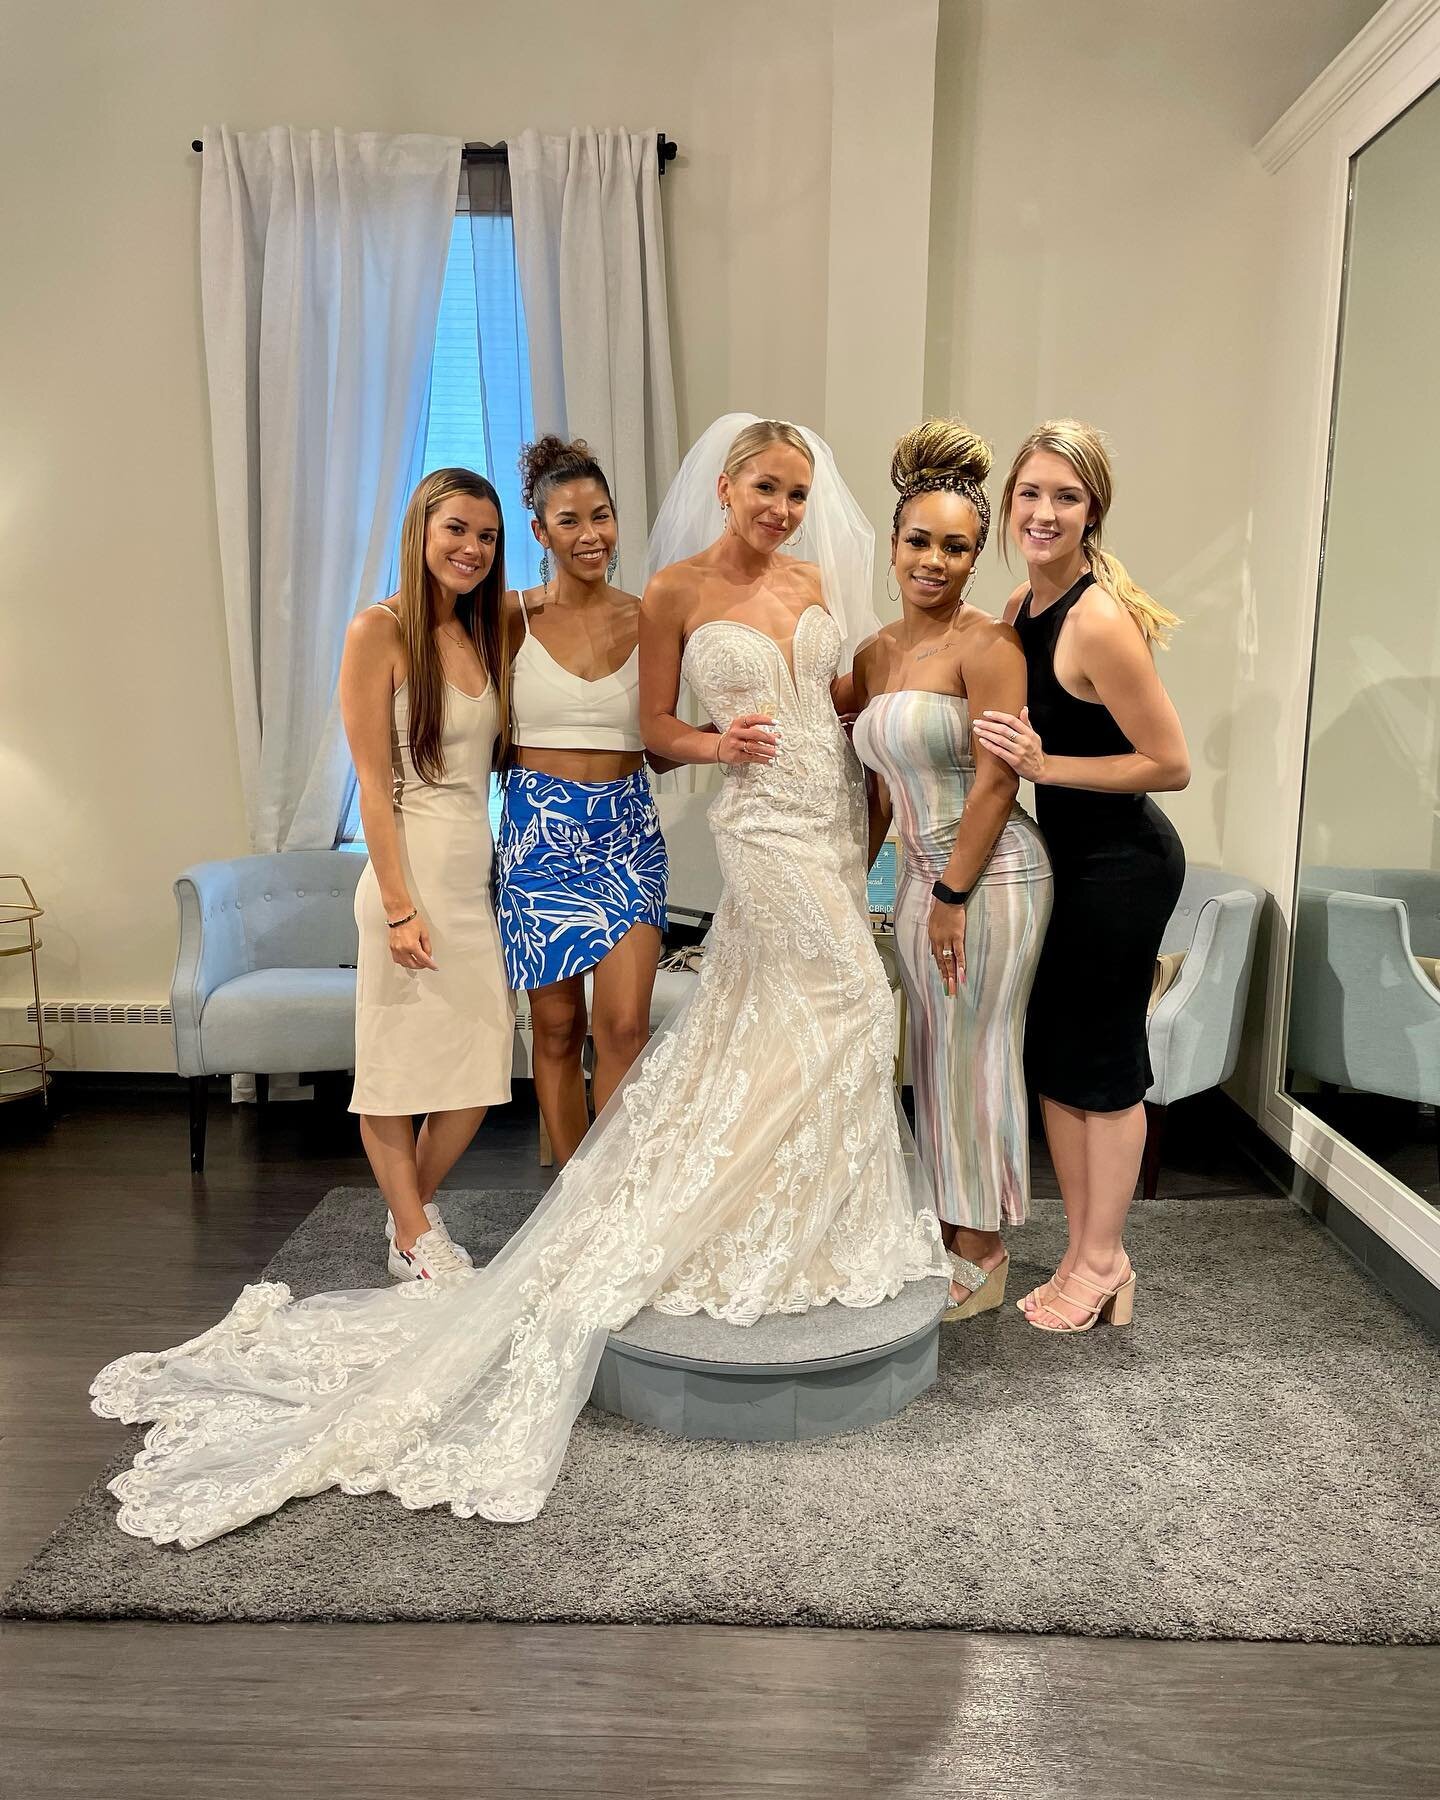 Didn&rsquo;t say yes to the dress but we&rsquo;re allllmost ready to say yes to the venue &amp; a date! 👰&zwj;♀️

I had so much fun celebrating all things me &amp; @alec_mel with my favorite people this last week, it made everything seem so real😍 I